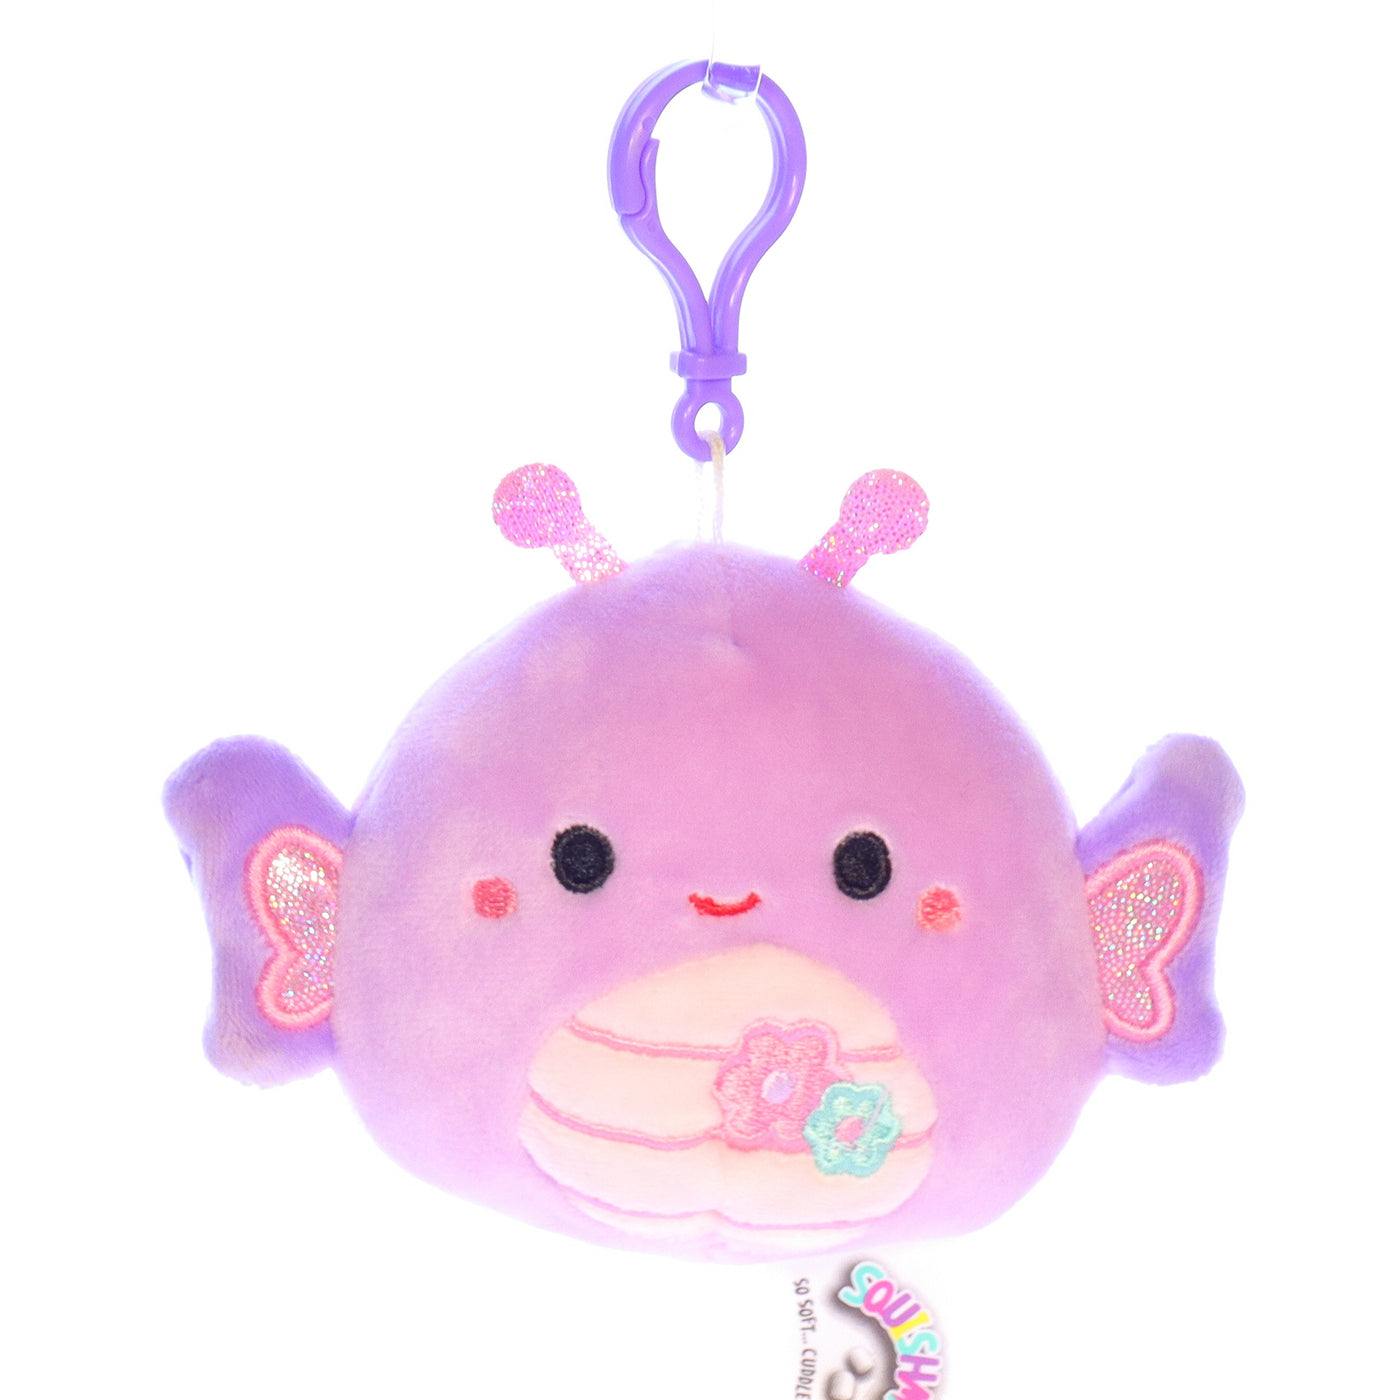 Squishmallows_734689975198_Brenda_the_Butterfly_Keychain_Stuffed_Animal_2019 Front View